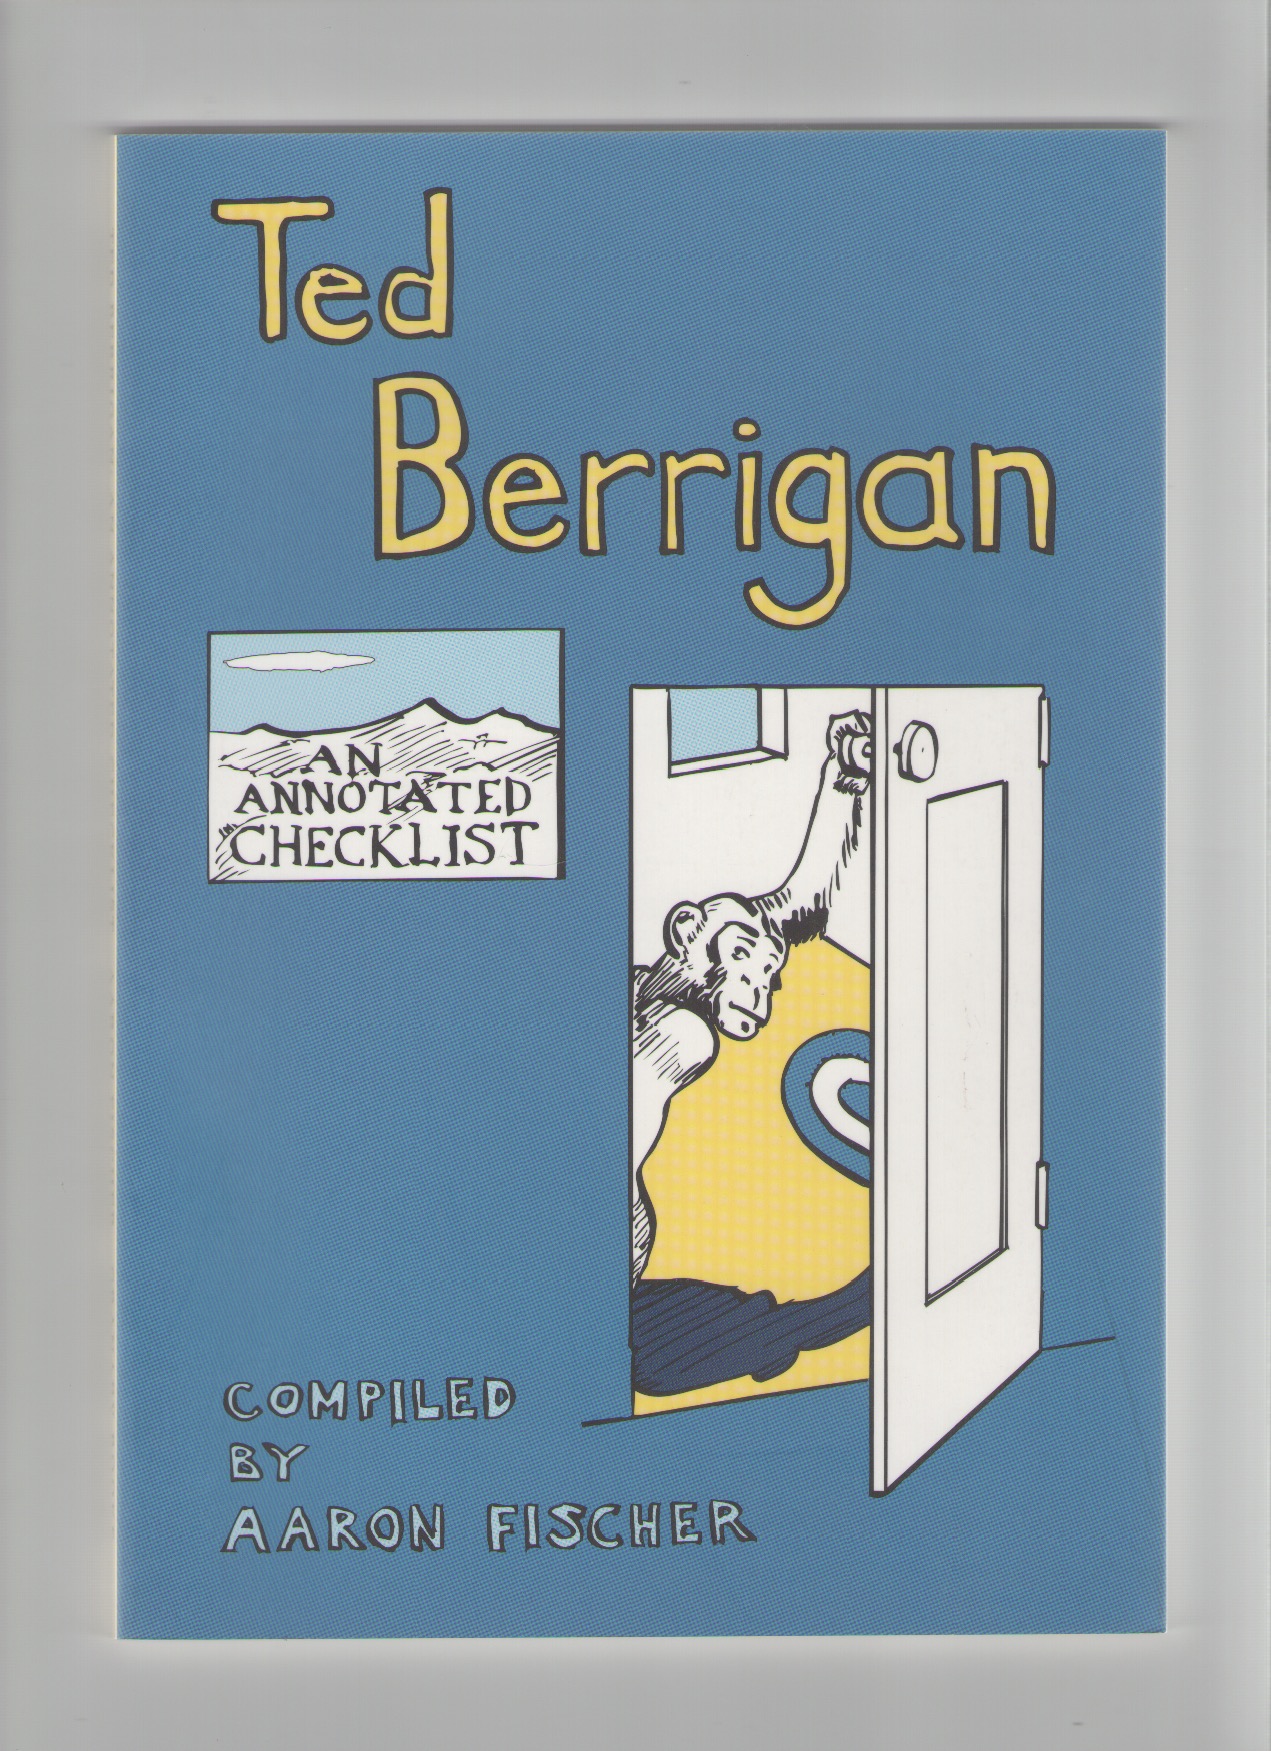 BERRIGAN, Ted - An annotated Checklist